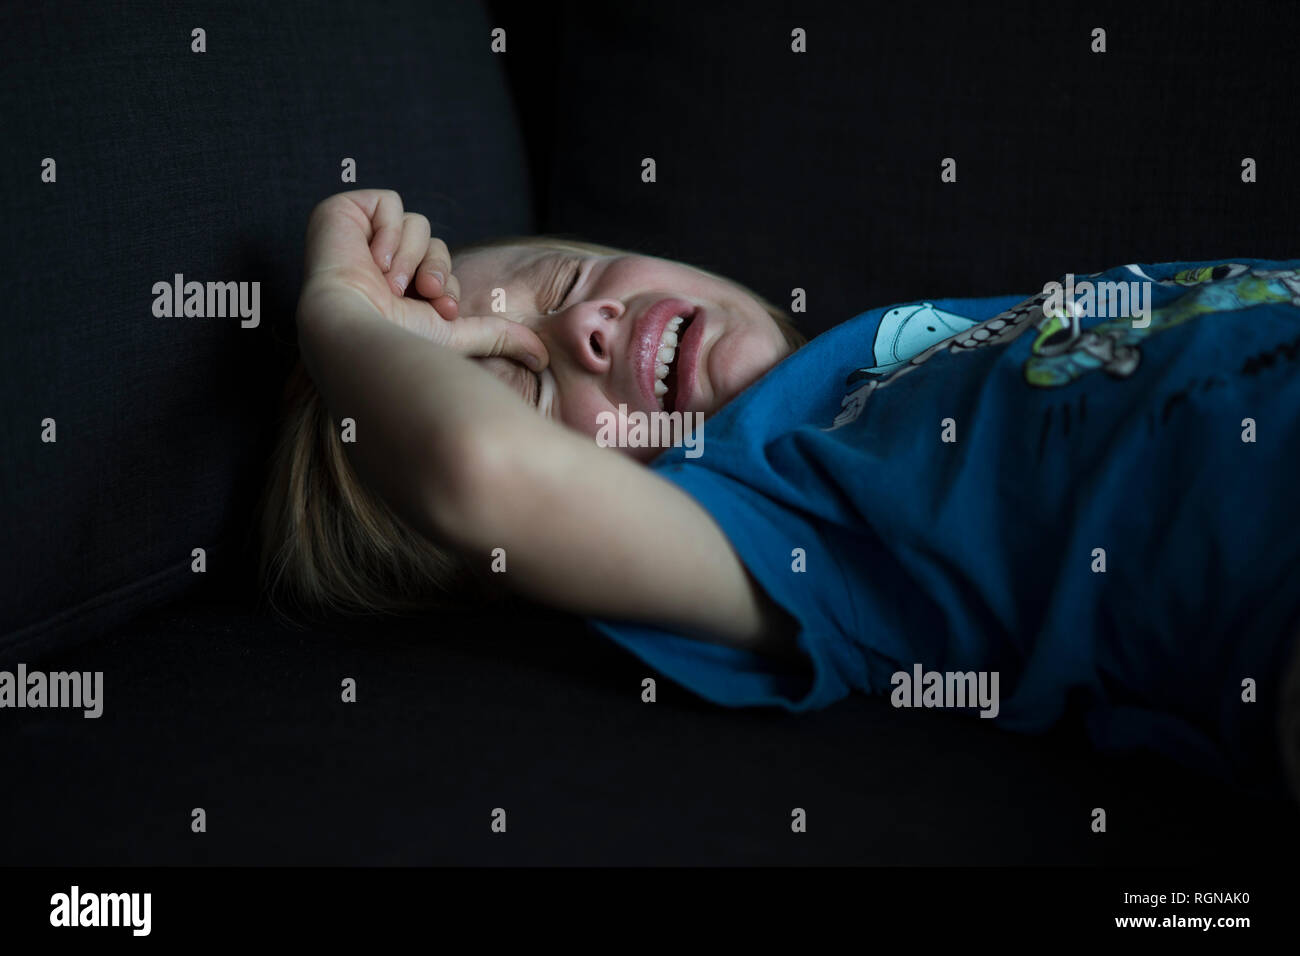 Crying boy lying on couch Banque D'Images